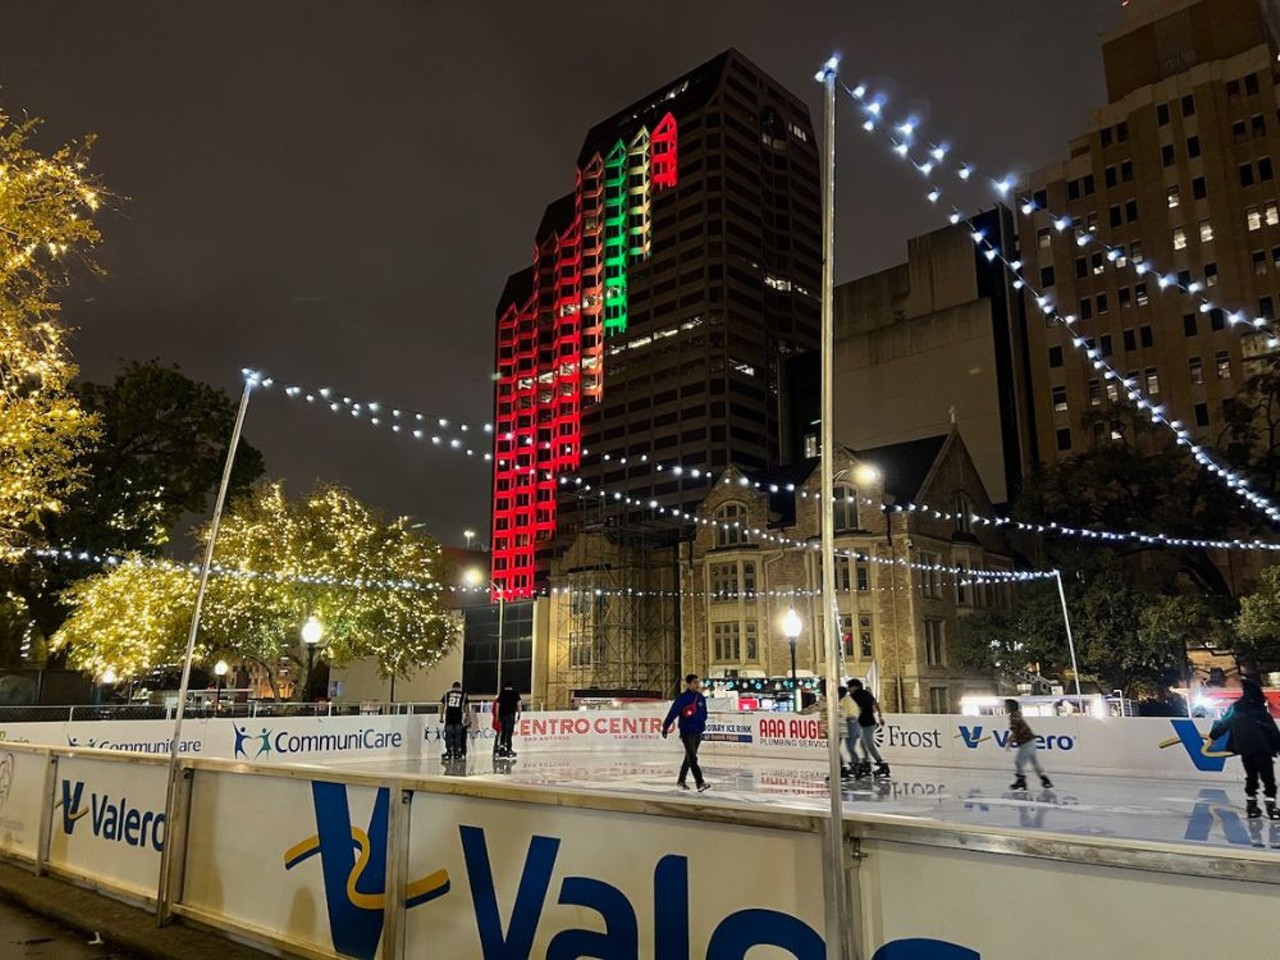 Go ice skating at Travis Park
It doesn't take long to become a tradition in San Antonio. Although it only debuted in 2019, the Rotary Ice Rink at downtown's Travis Park has already become a must for many residents. The rink will be open from Nov. 17-Jan. 15, 2024 this year.